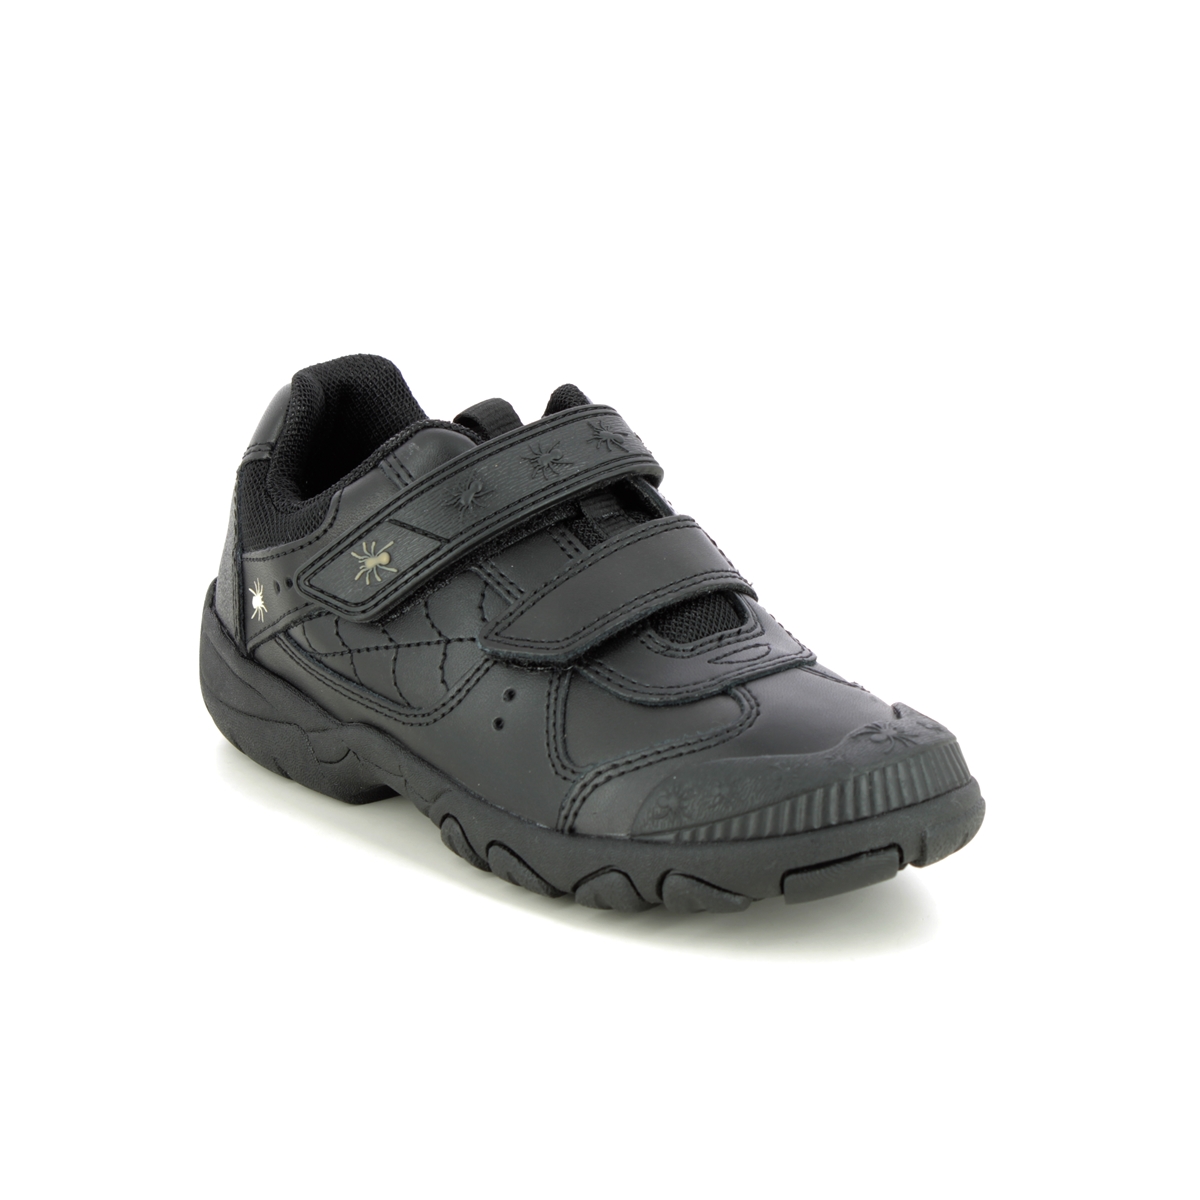 Start Rite - Tarantula In Black Leather 2272-76F In Size 13 In Plain Black Leather For School Boys Shoes  In Black Leather For kids